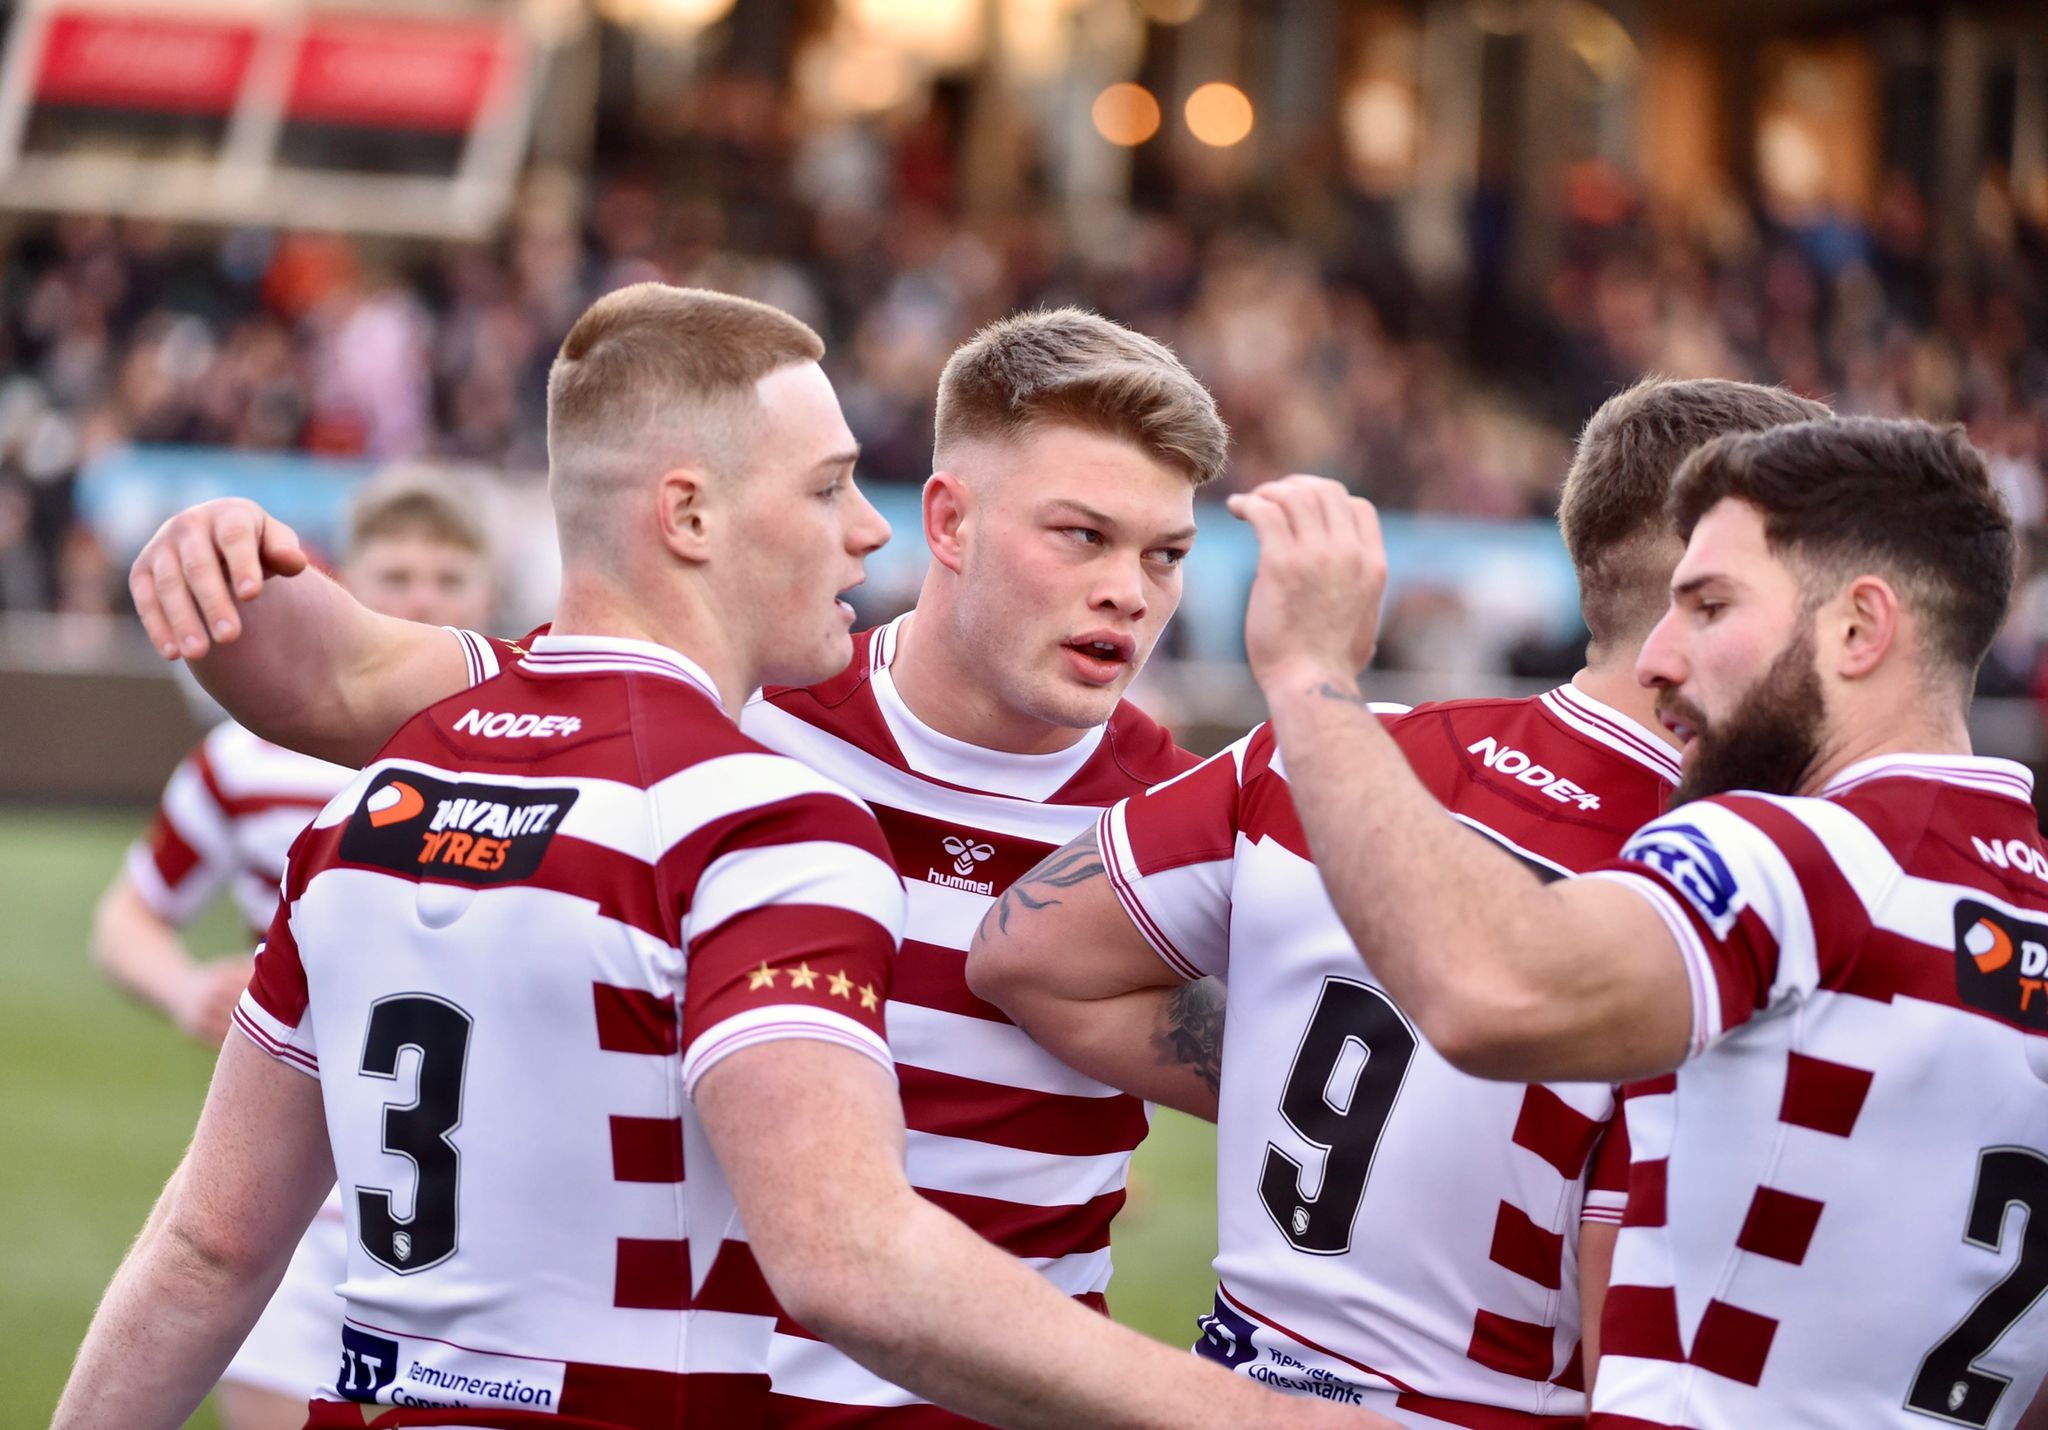 20-facts-about-wigan-warriors